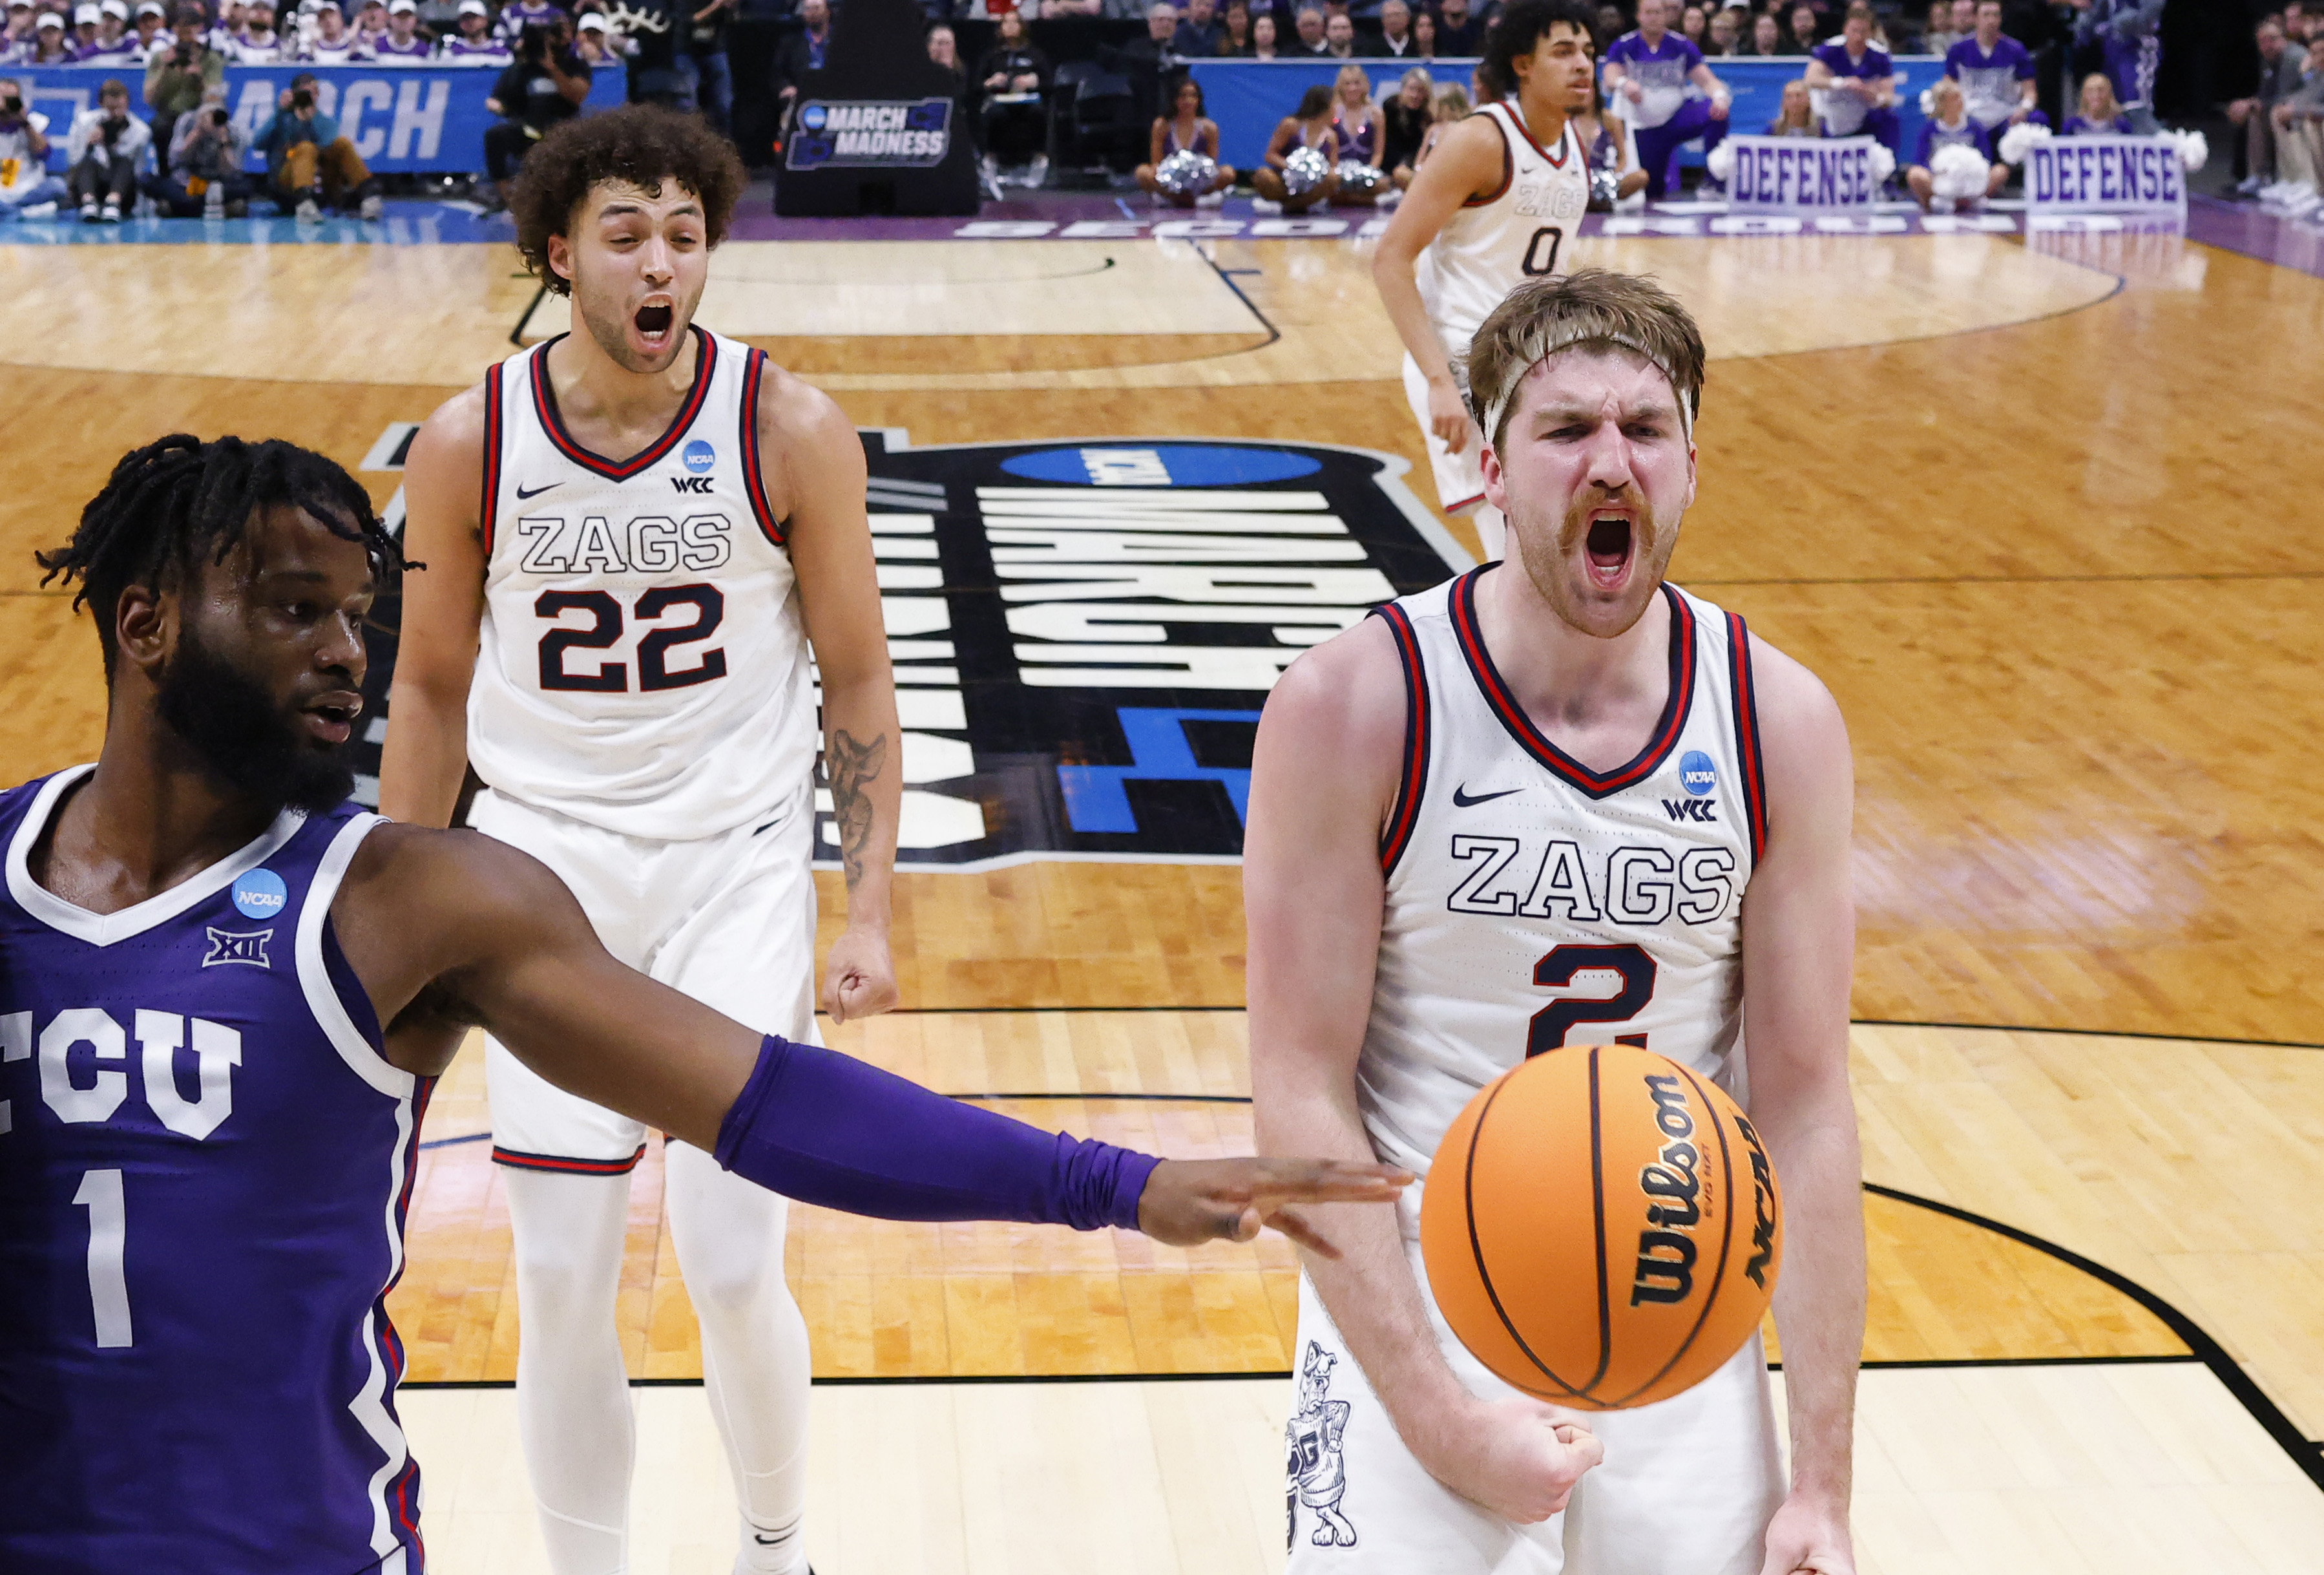 Drew Timme #2 of the Gonzaga Bulldogs reacts after a basket during the second half against the TCU Horned Frogs in the second round of the NCAA Men’s Basketball Tournament at Ball Arena on March 19, 2023 in Denver, Colorado.